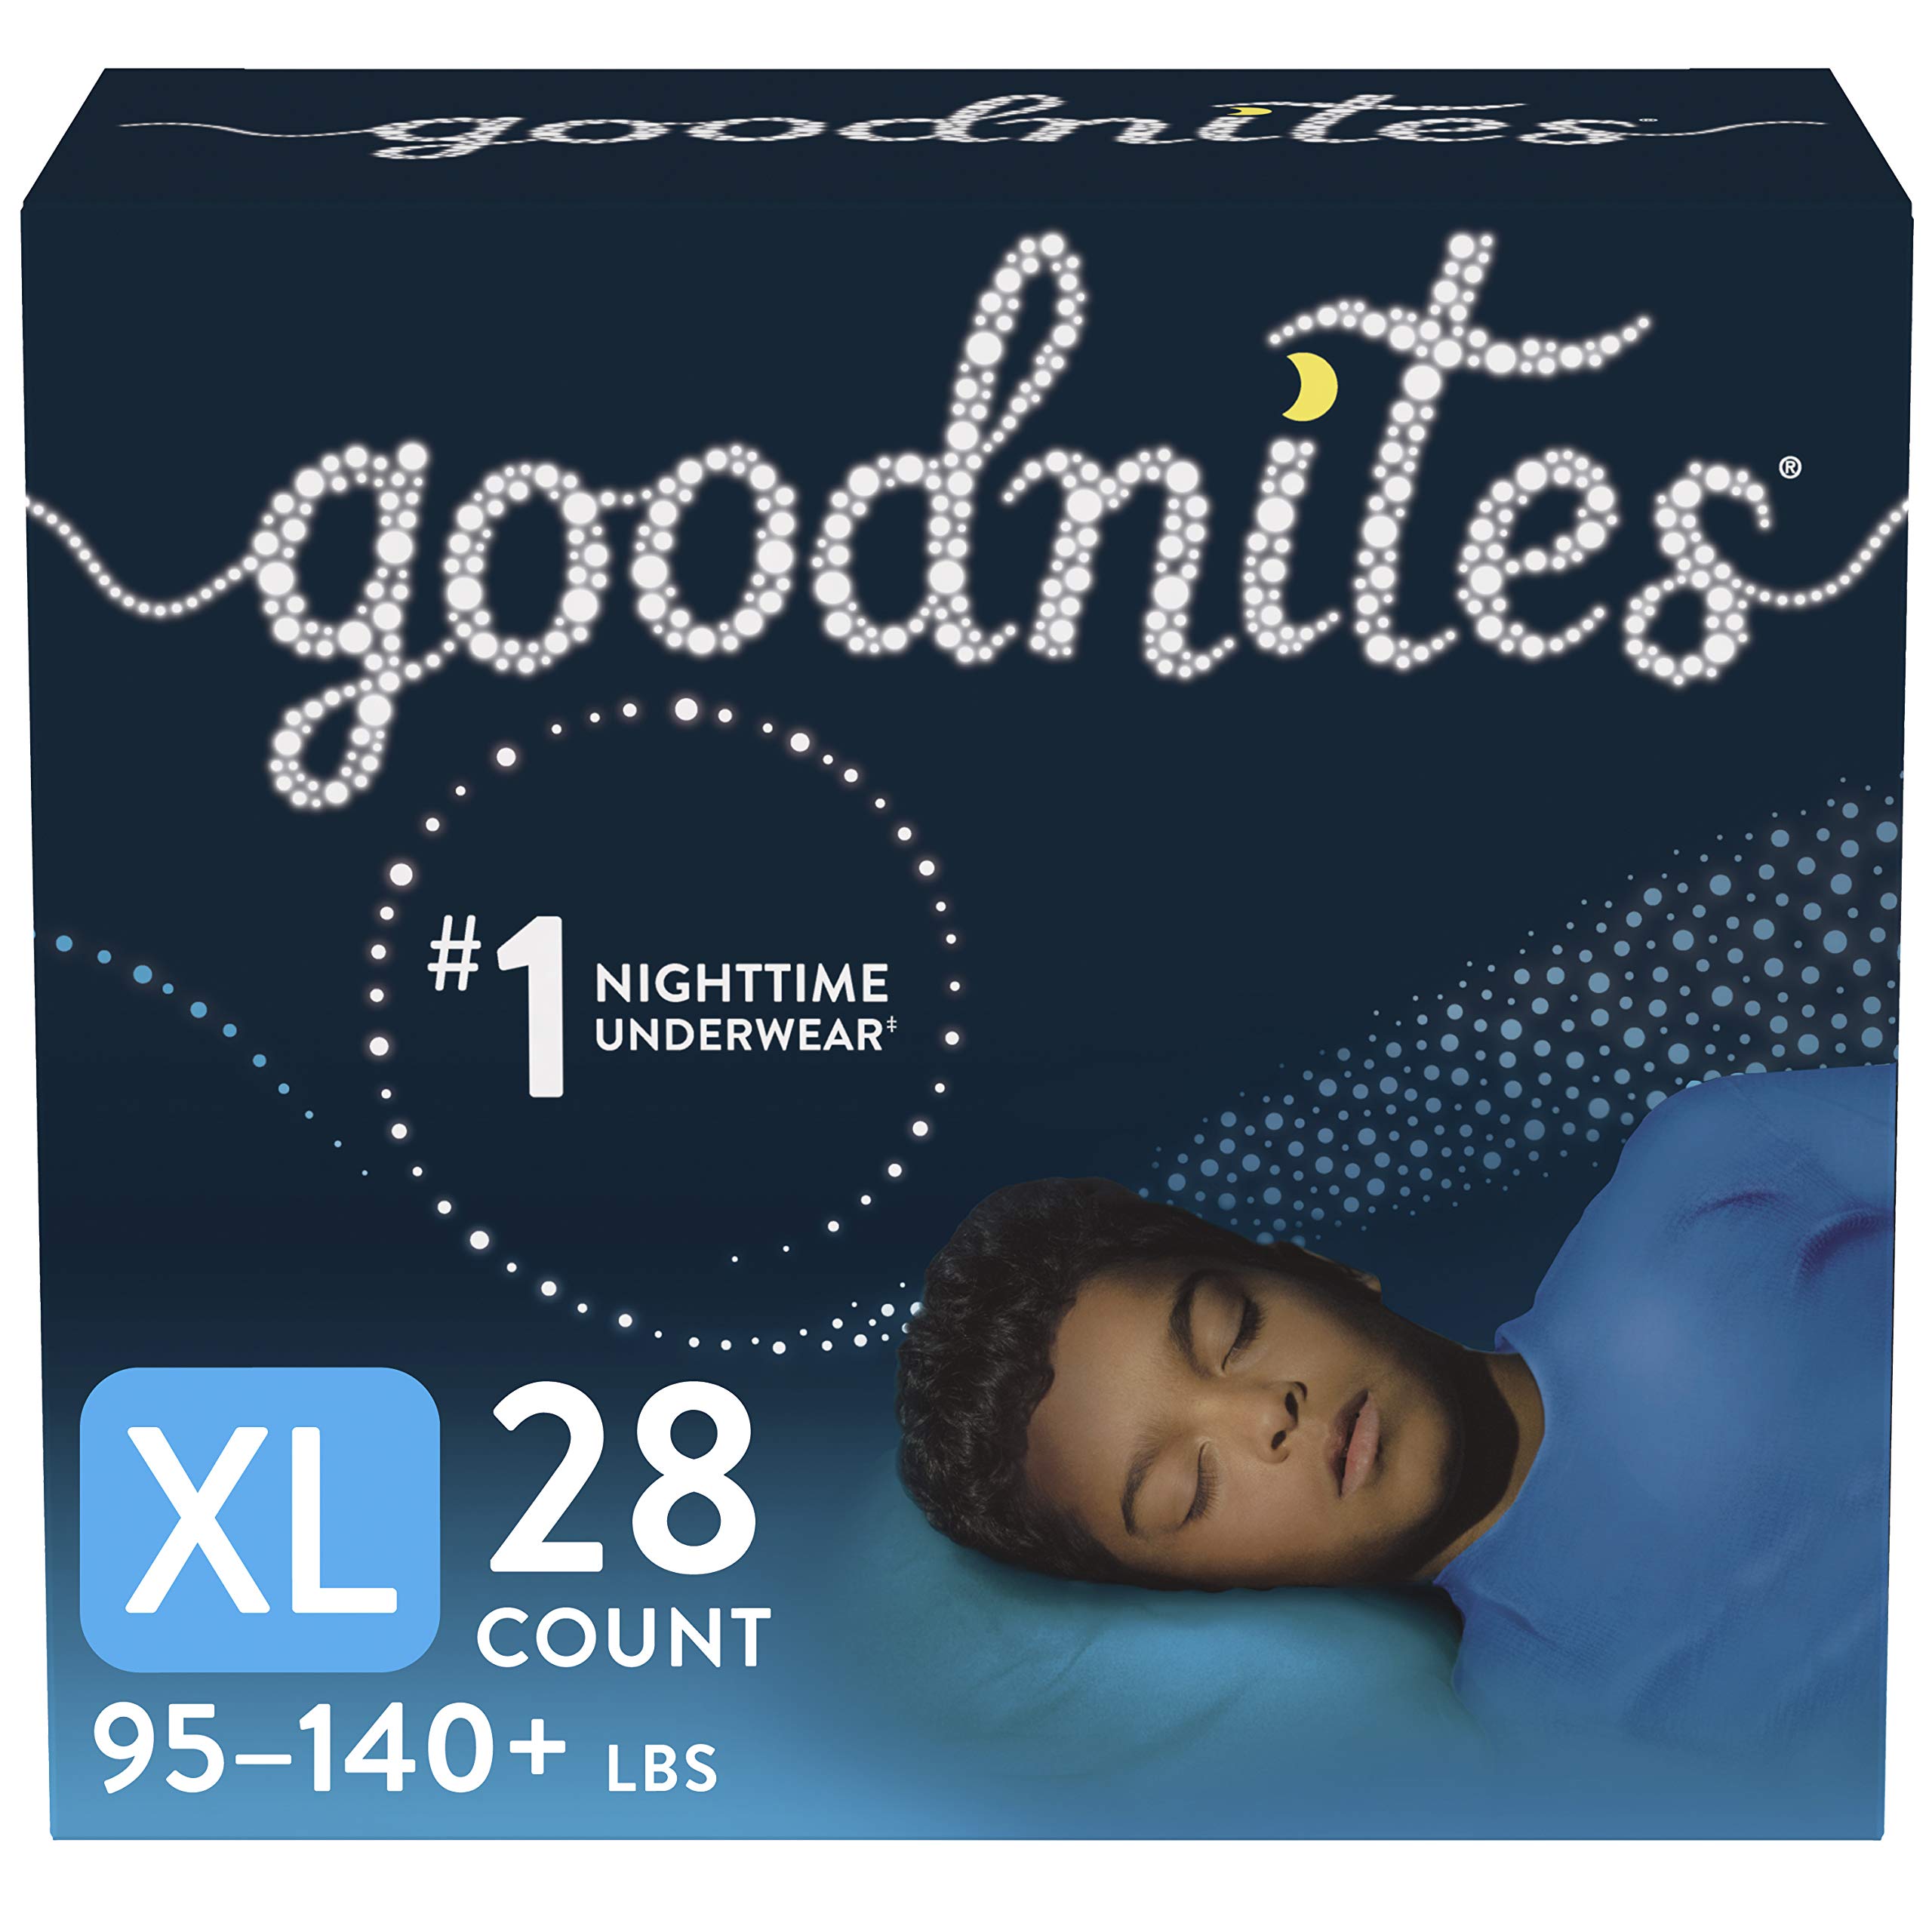 Goodnites Boys' Nighttime Bedwetting Underwear, Size Extra Large (95-140+ lbs), 28 Ct